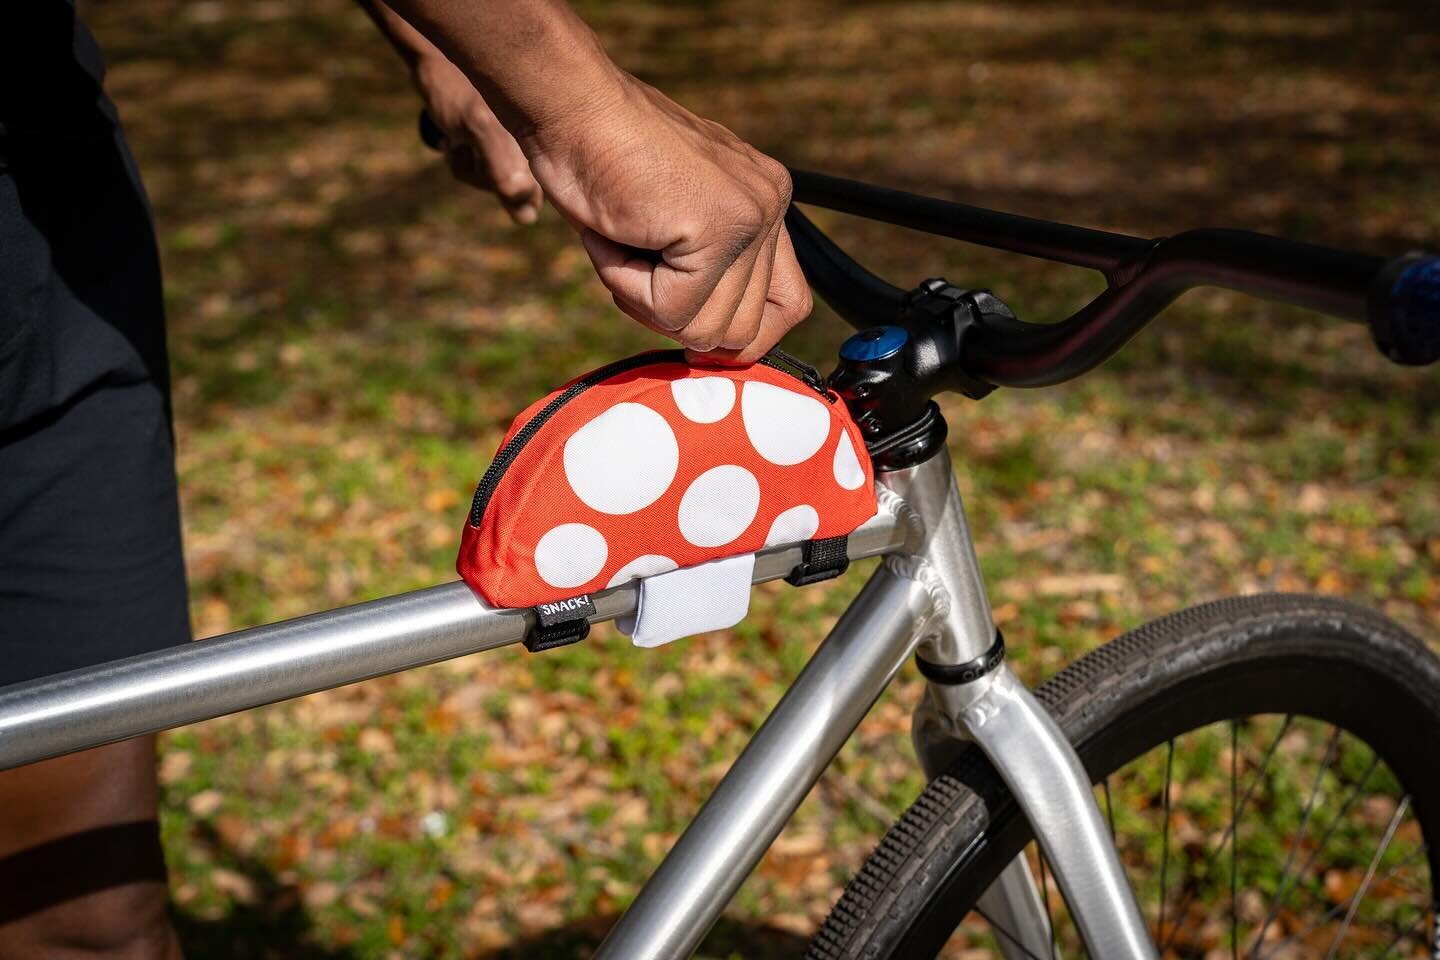 The fungi you never knew you needed! 

Mushroom Top Tube bags are the cap to your cycling adventures 🍄 Carry your snacks, tools, and other cycling essentials and ride away on a whimsical journey

#SnackSocialClub #Snackbike #Snackride #Snacks #bikes